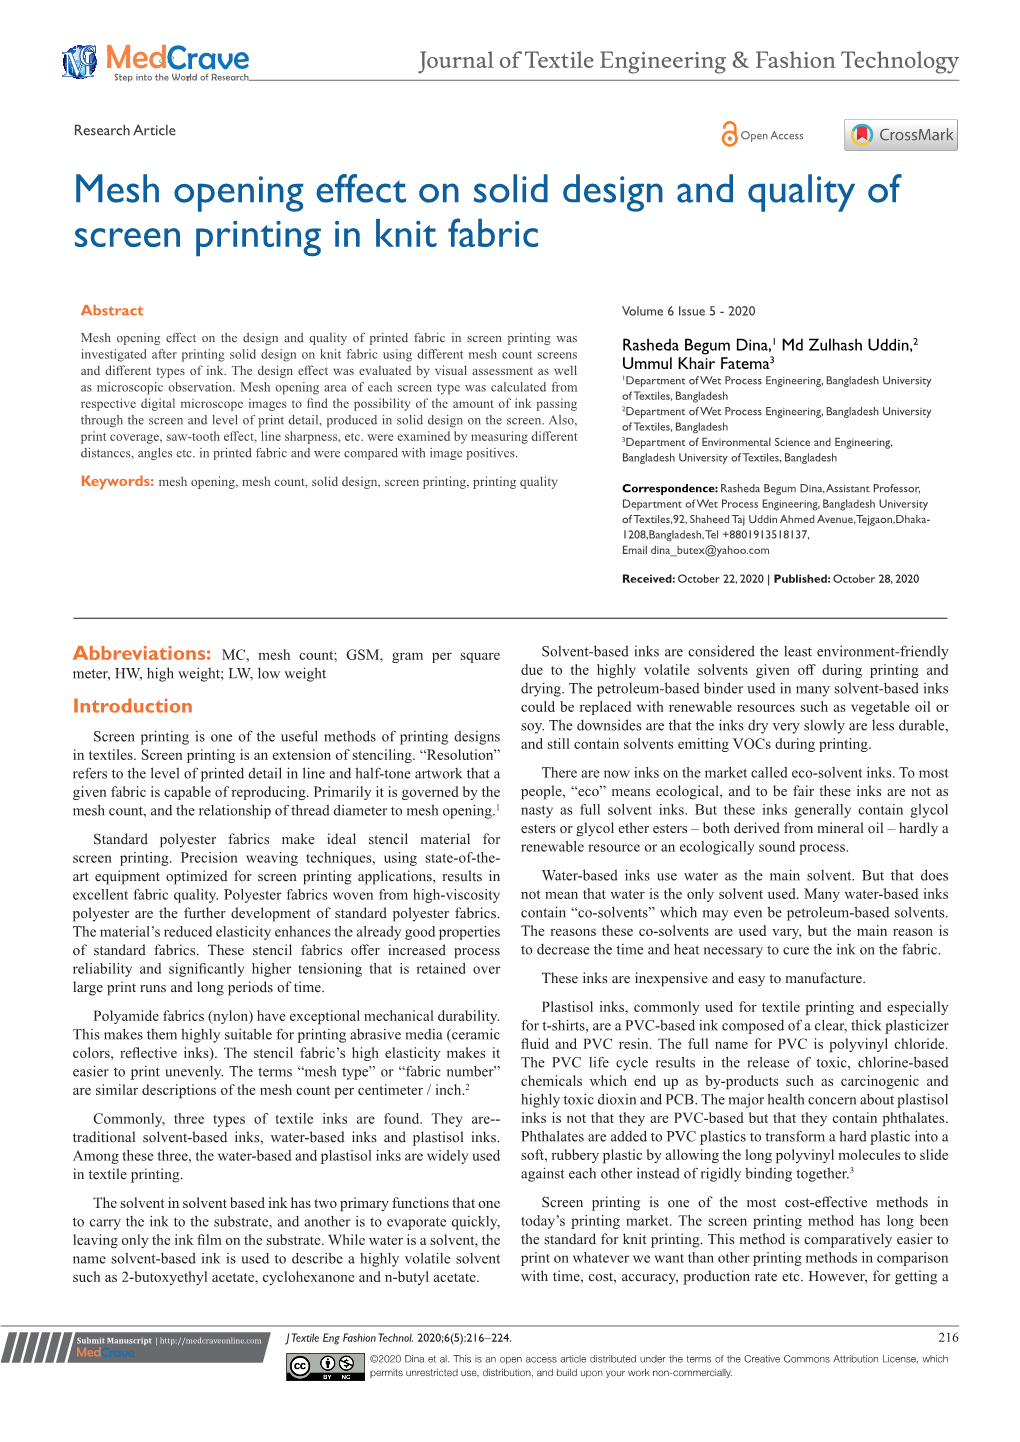 Mesh Opening Effect on Solid Design and Quality of Screen Printing in Knit Fabric